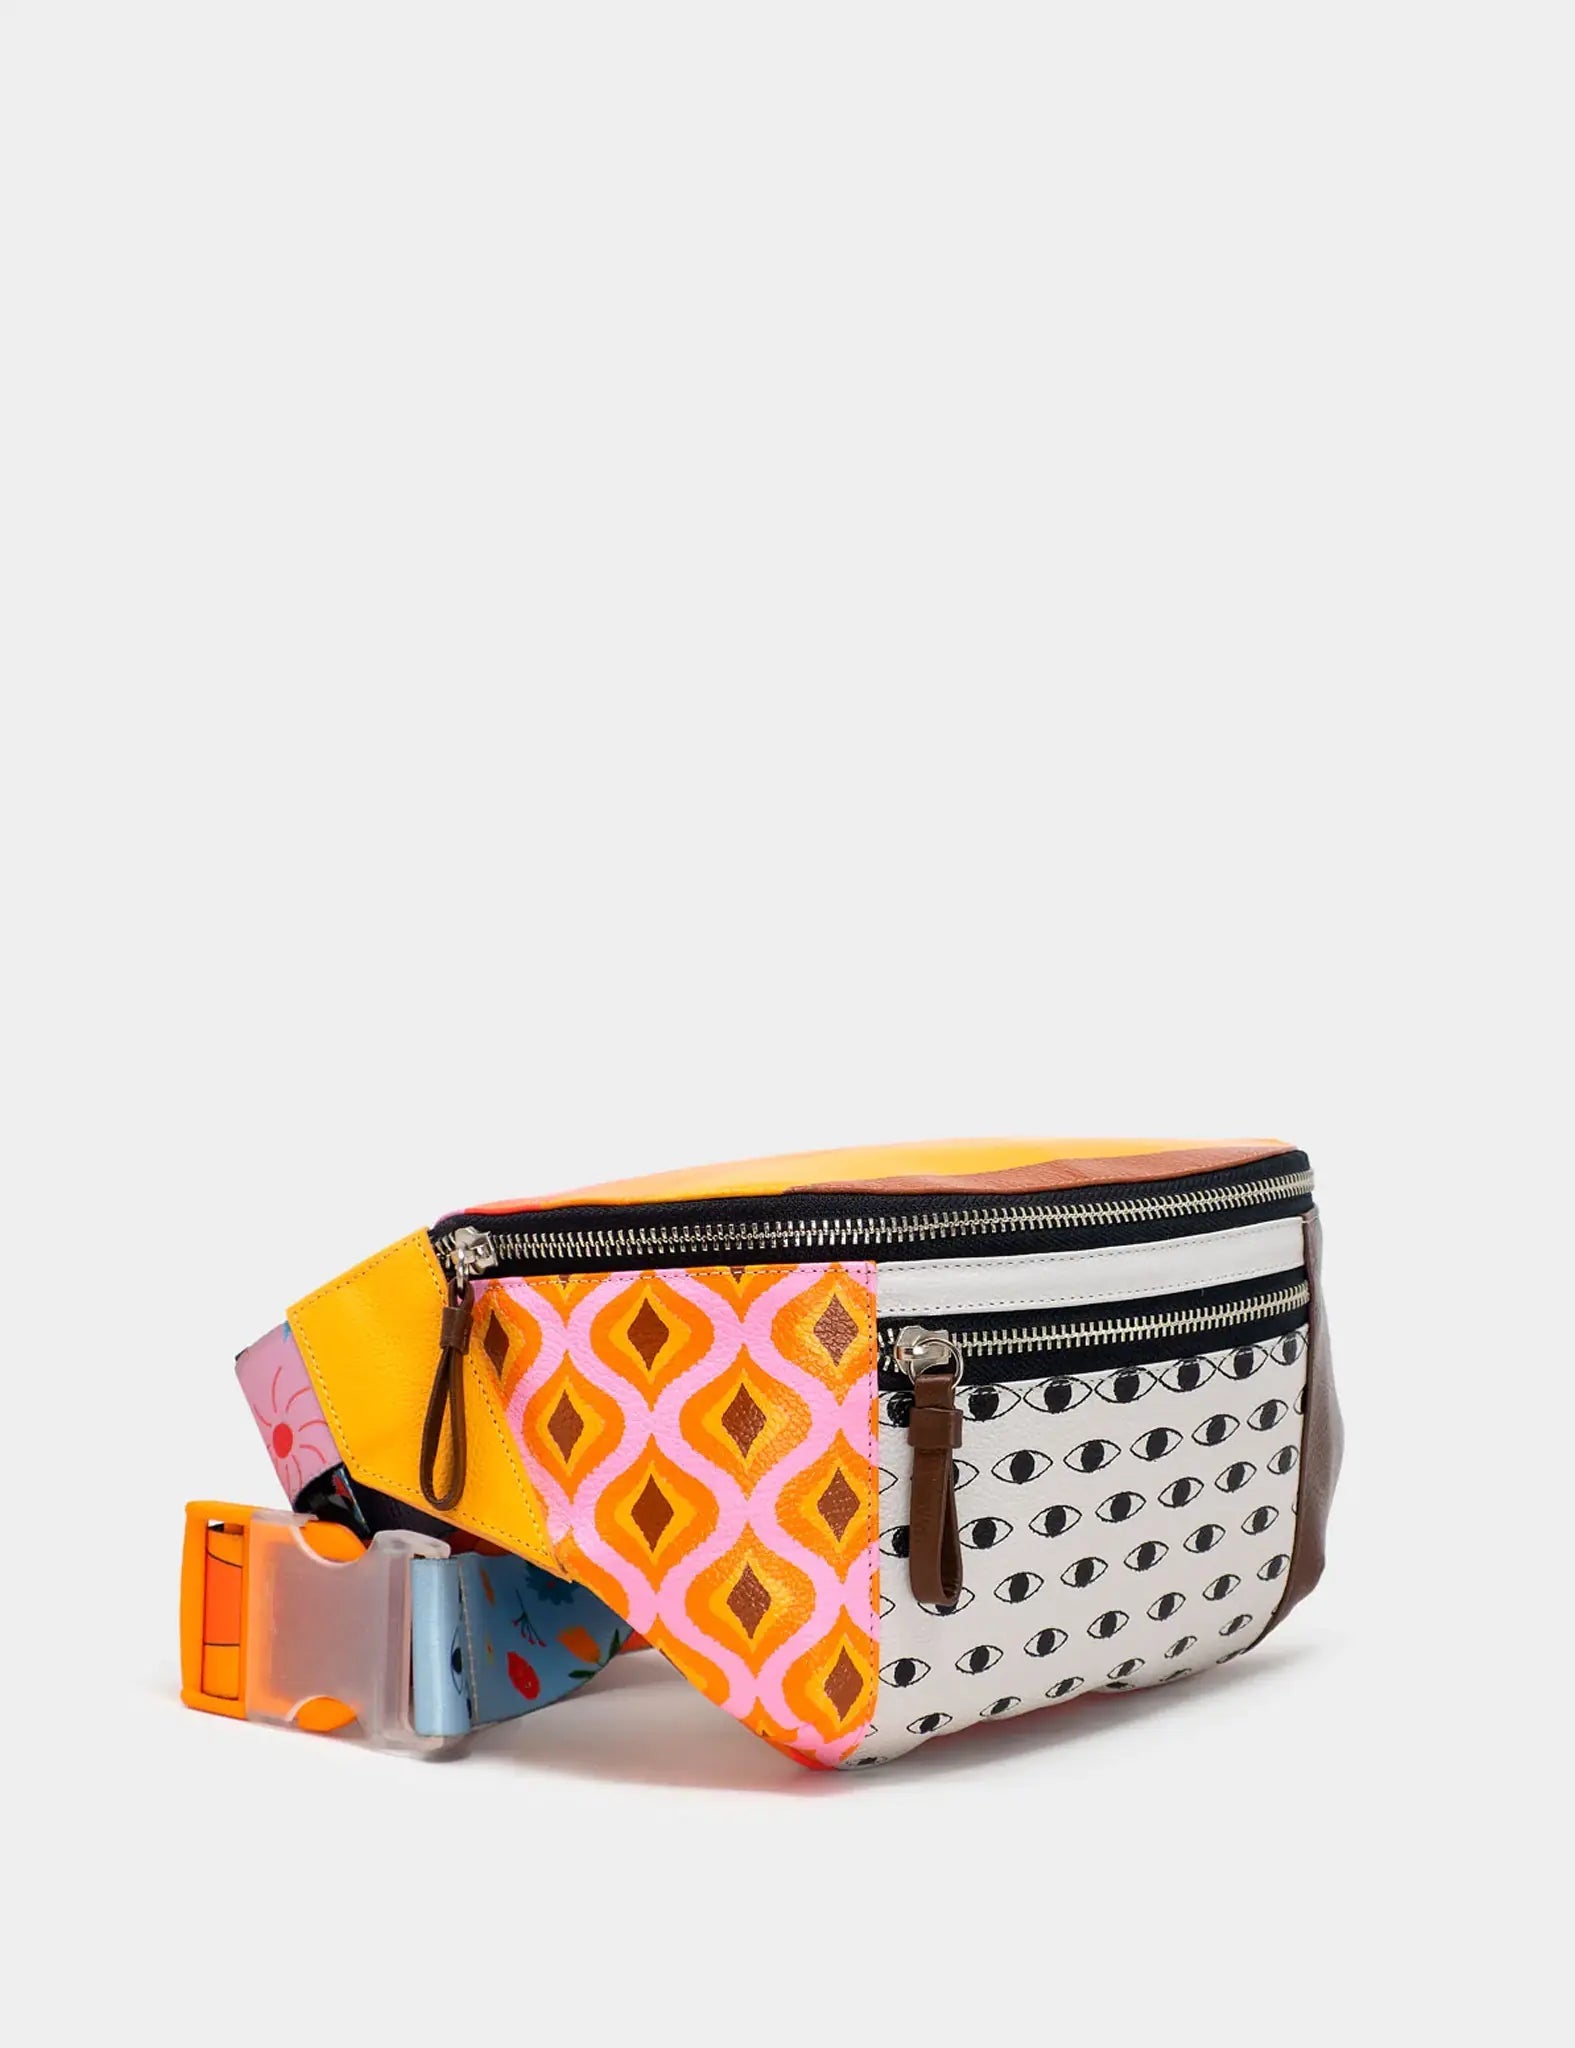 Harold Fanny Pack - Cosmic Journey Print - Front corner angle view